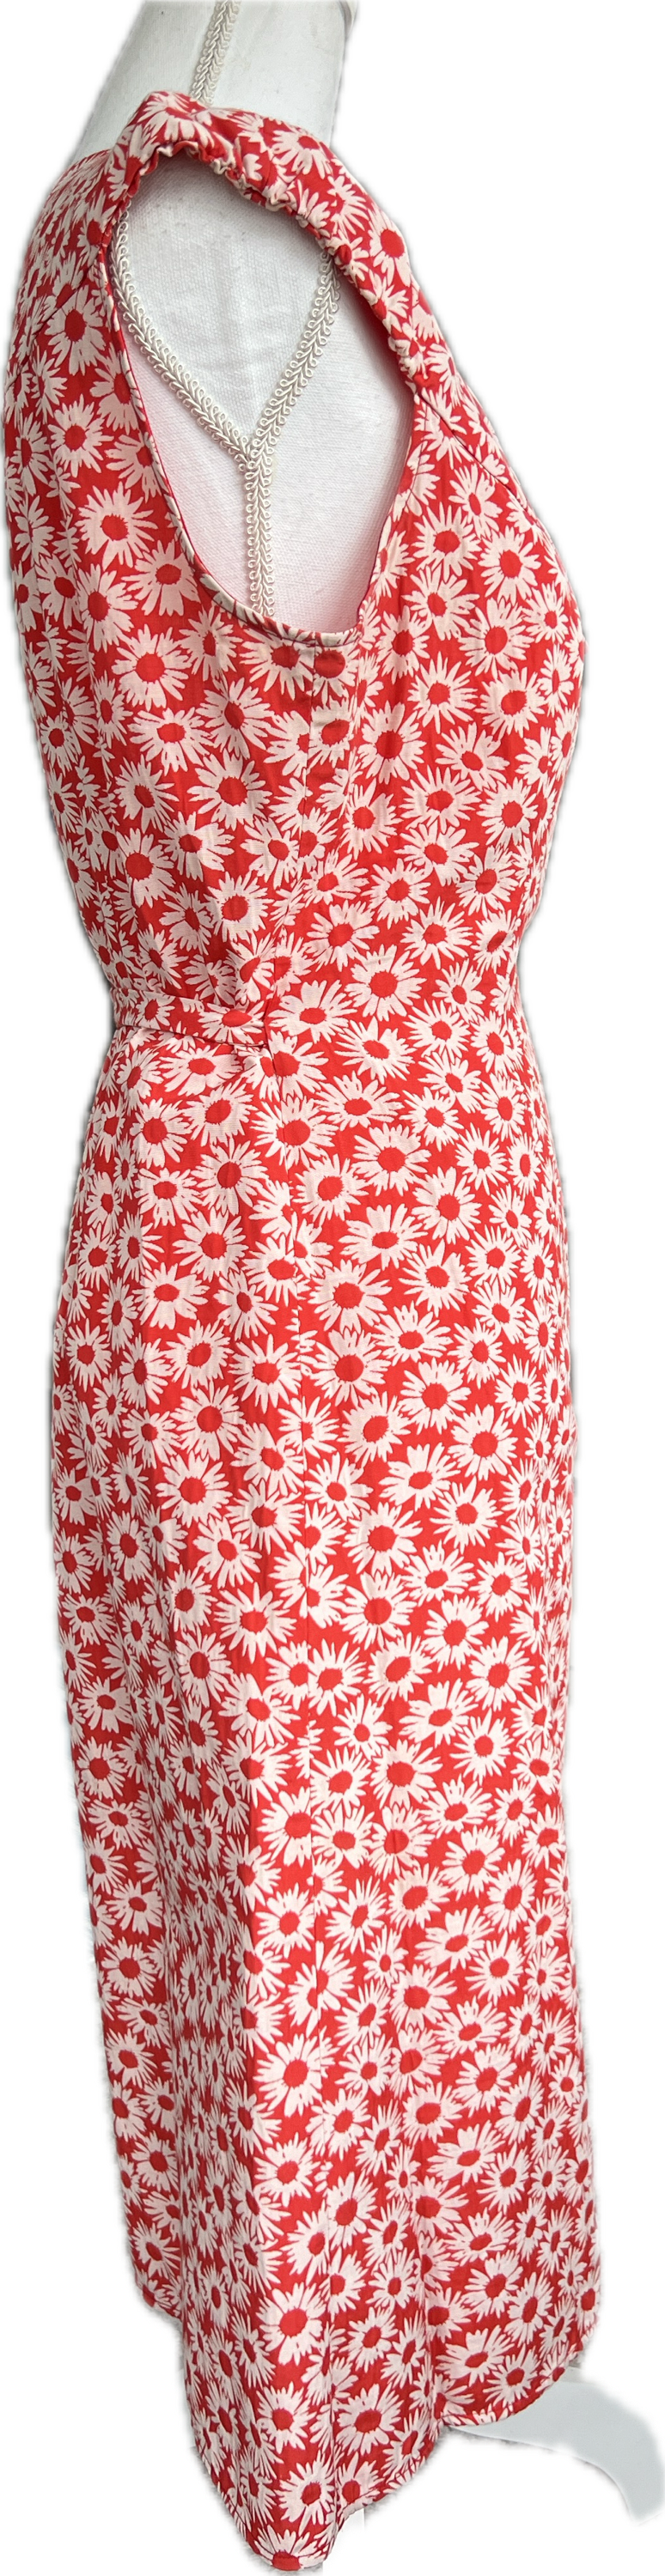 Antoine & Lili Red and White Daisy Wrap Dress, S/M